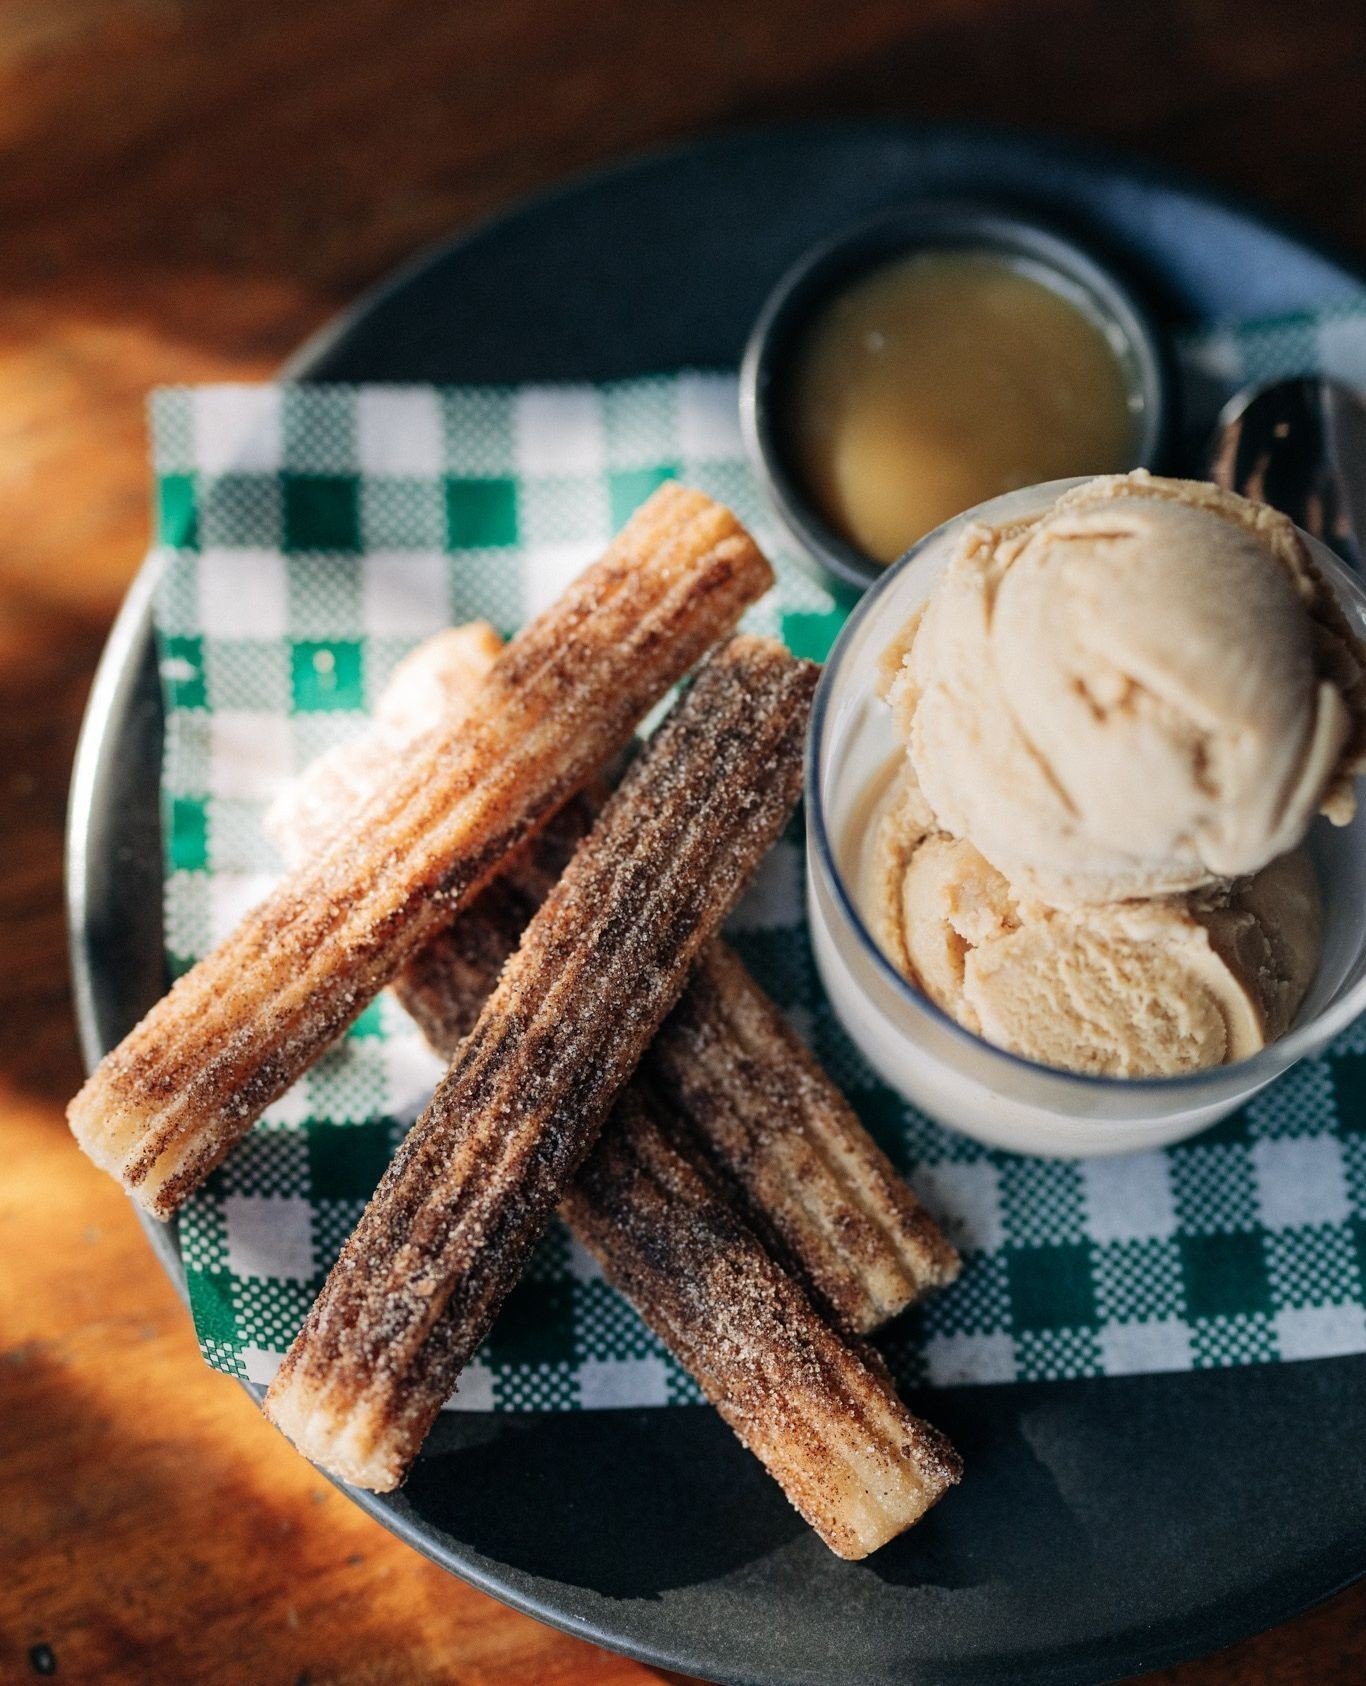 You can&rsquo;t say no to a sweet treat! Our Churros are fried and tossed with cinnamon sugar, caramel sauce and dulce de leche gelato for the perfect end to your Parry St meal 😍 #parrystgarage